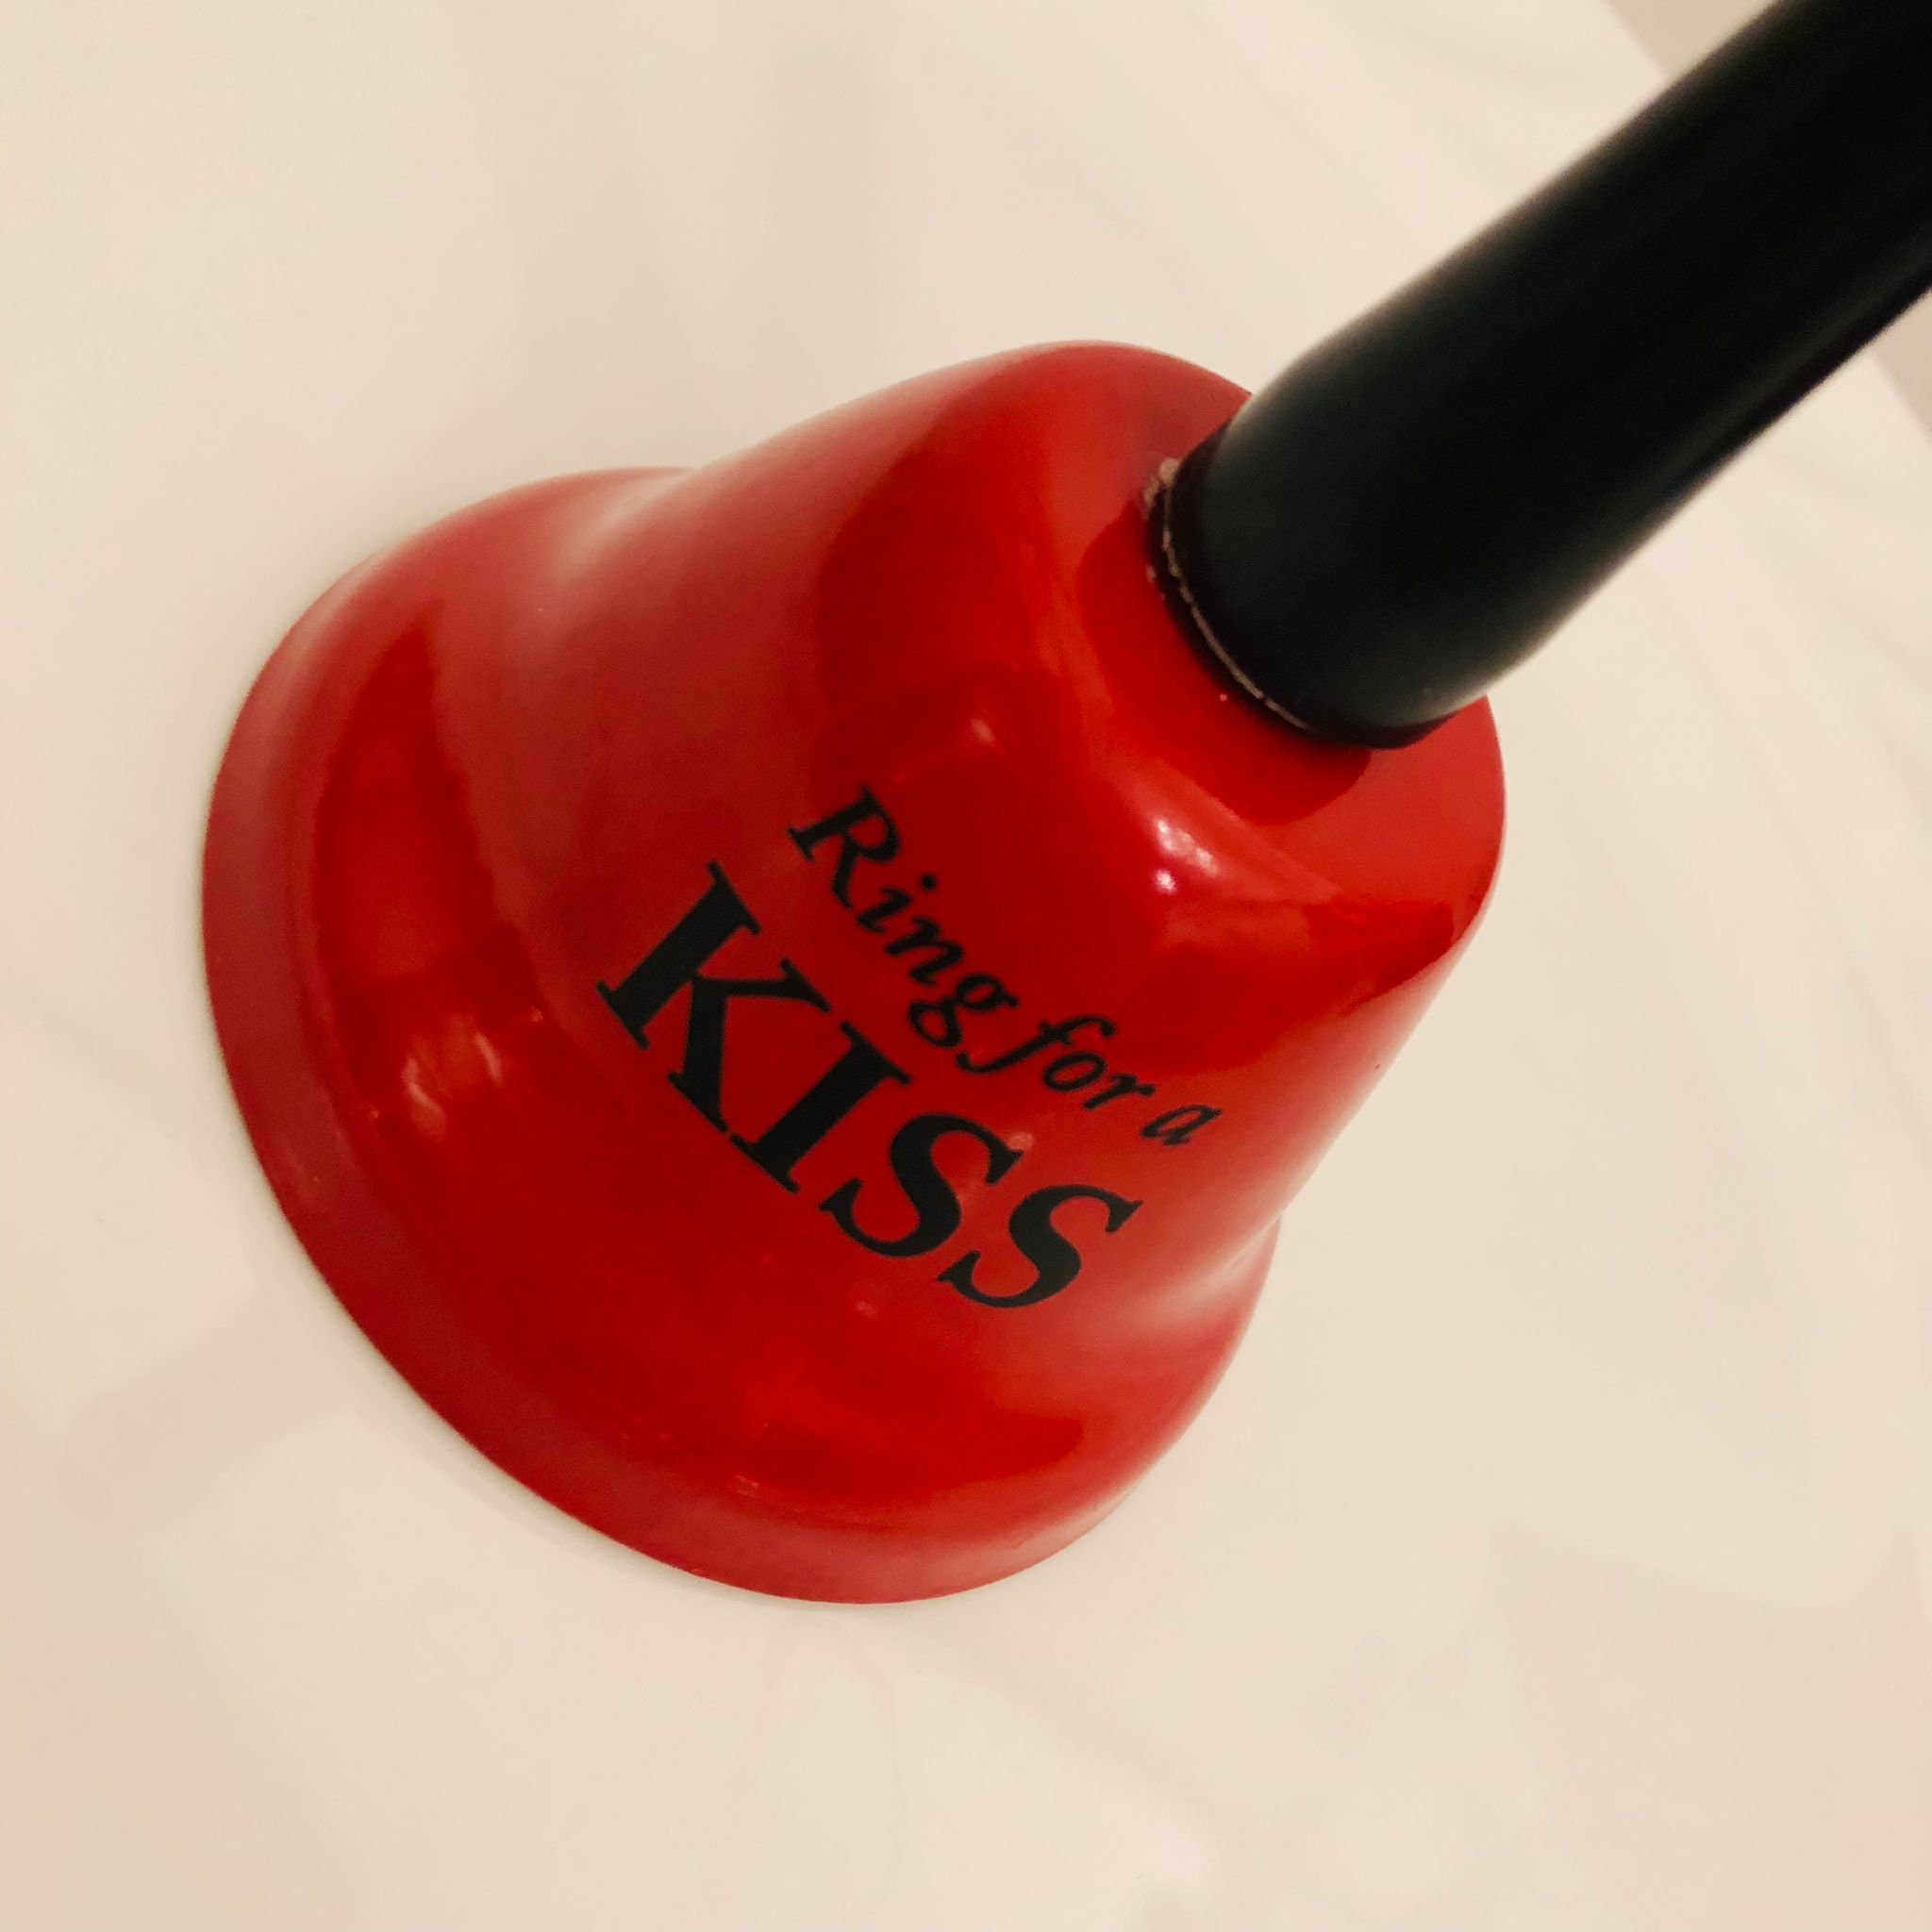 Intimate Large Bell, Ring for a Kiss, Funny Cute Valentine Gift for Him Her  